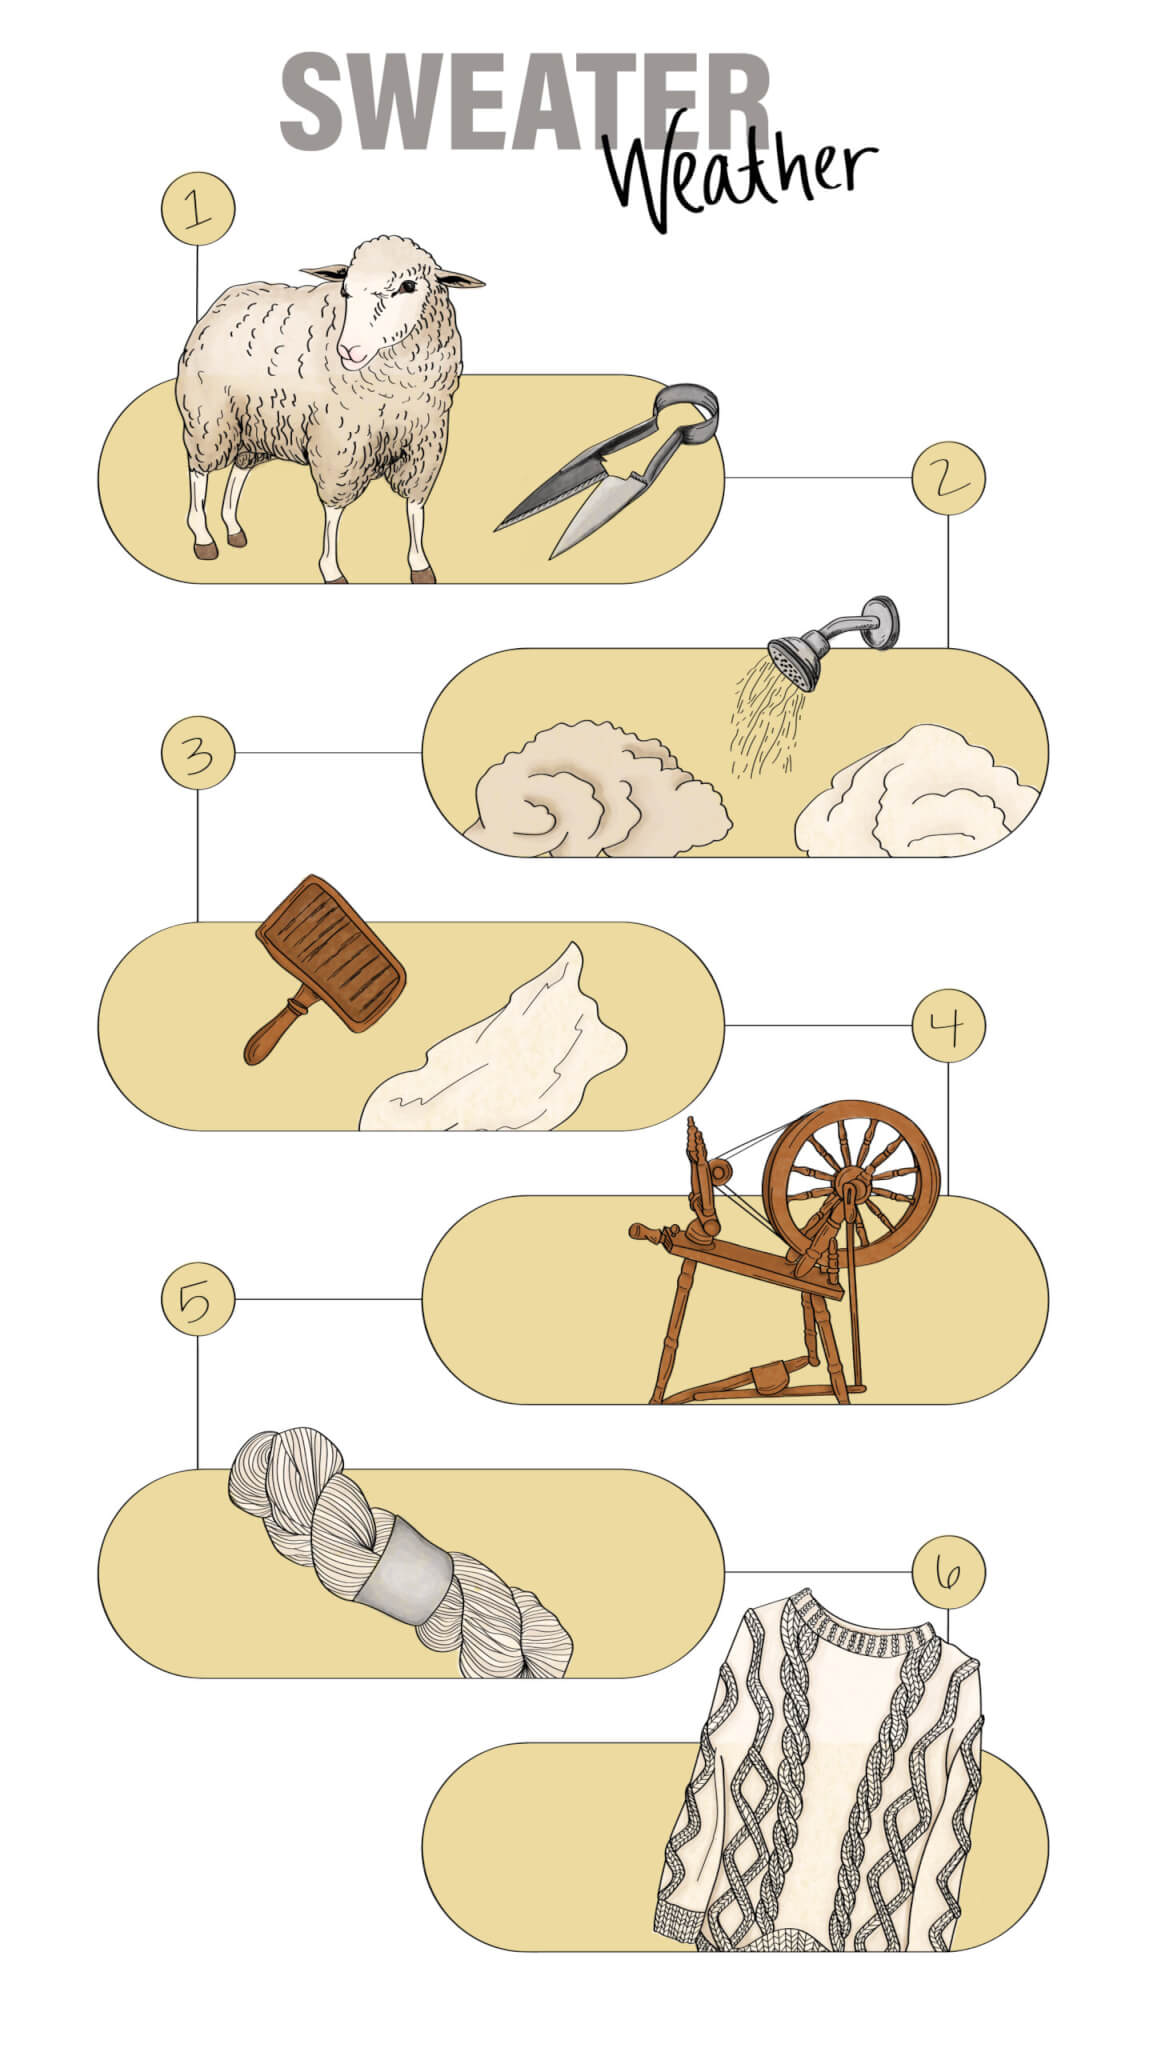 This graphic depicts all the stages hand spinners and other artisans work through when turning fleeces into yarn or roving, bundles of fiber. First, the fleeces are sheared then washed and dried. The wool is then carded, brushing to clean, untangle and integrate the fibers. The wool can then be spun into yarn. 